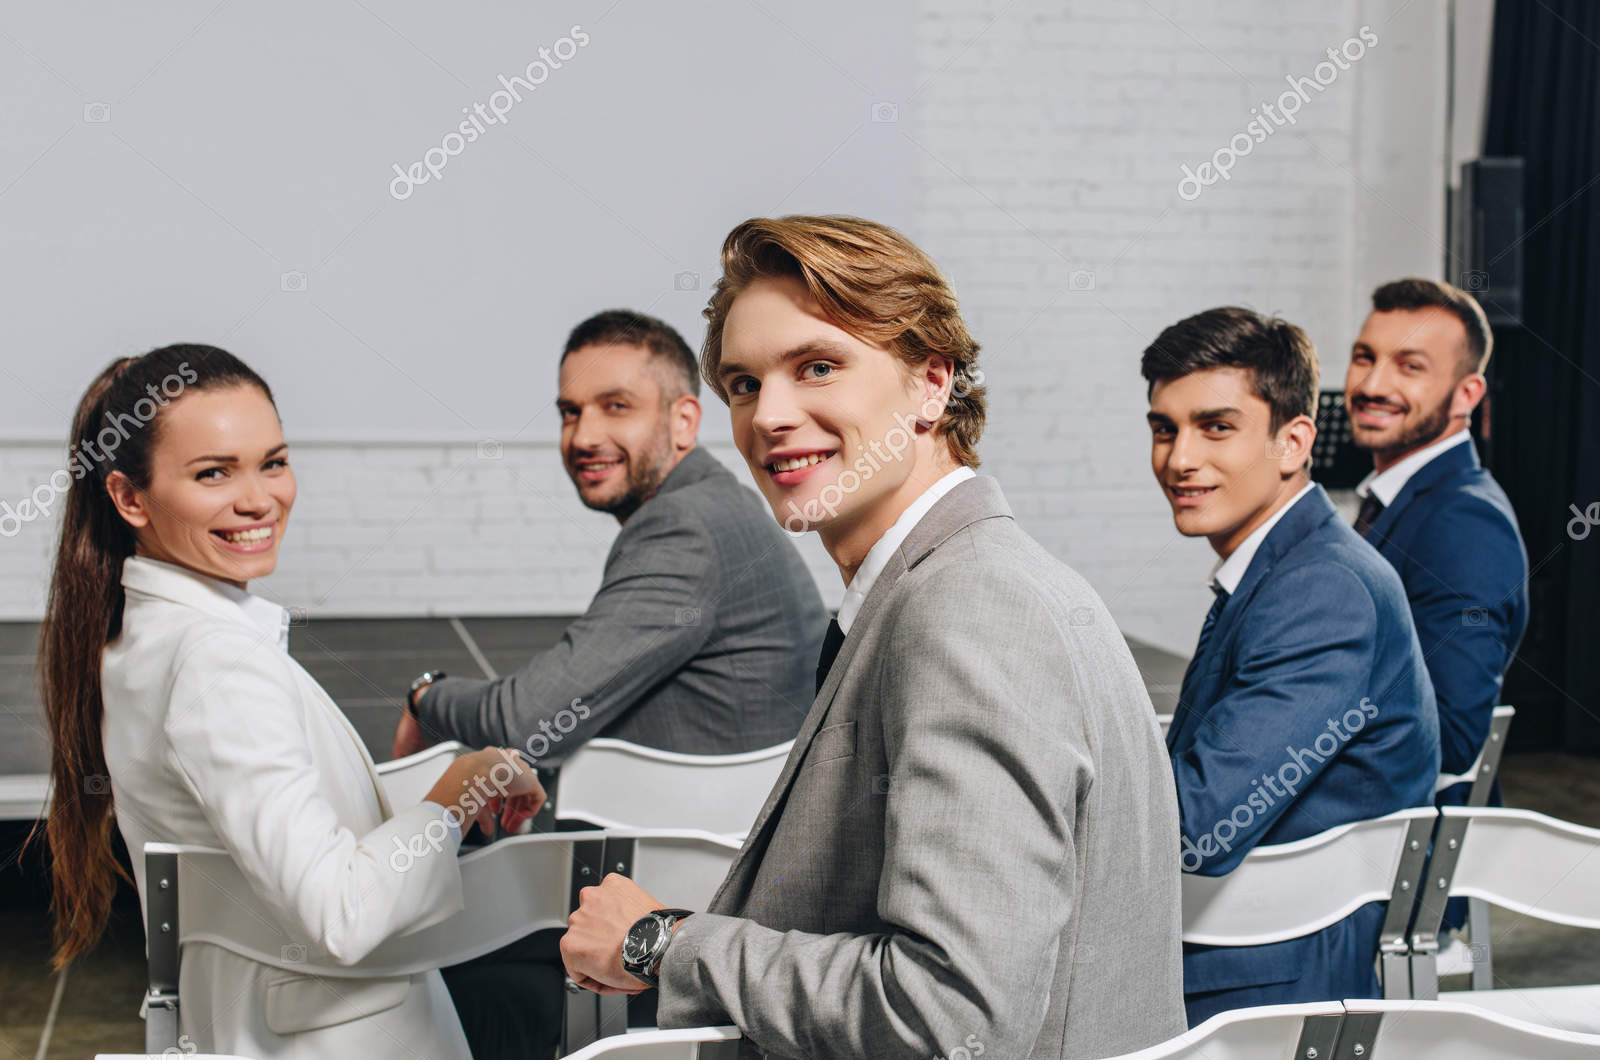 depositphotos_209197462-stock-photo-smiling-businesspeople-sitting-chairs-training